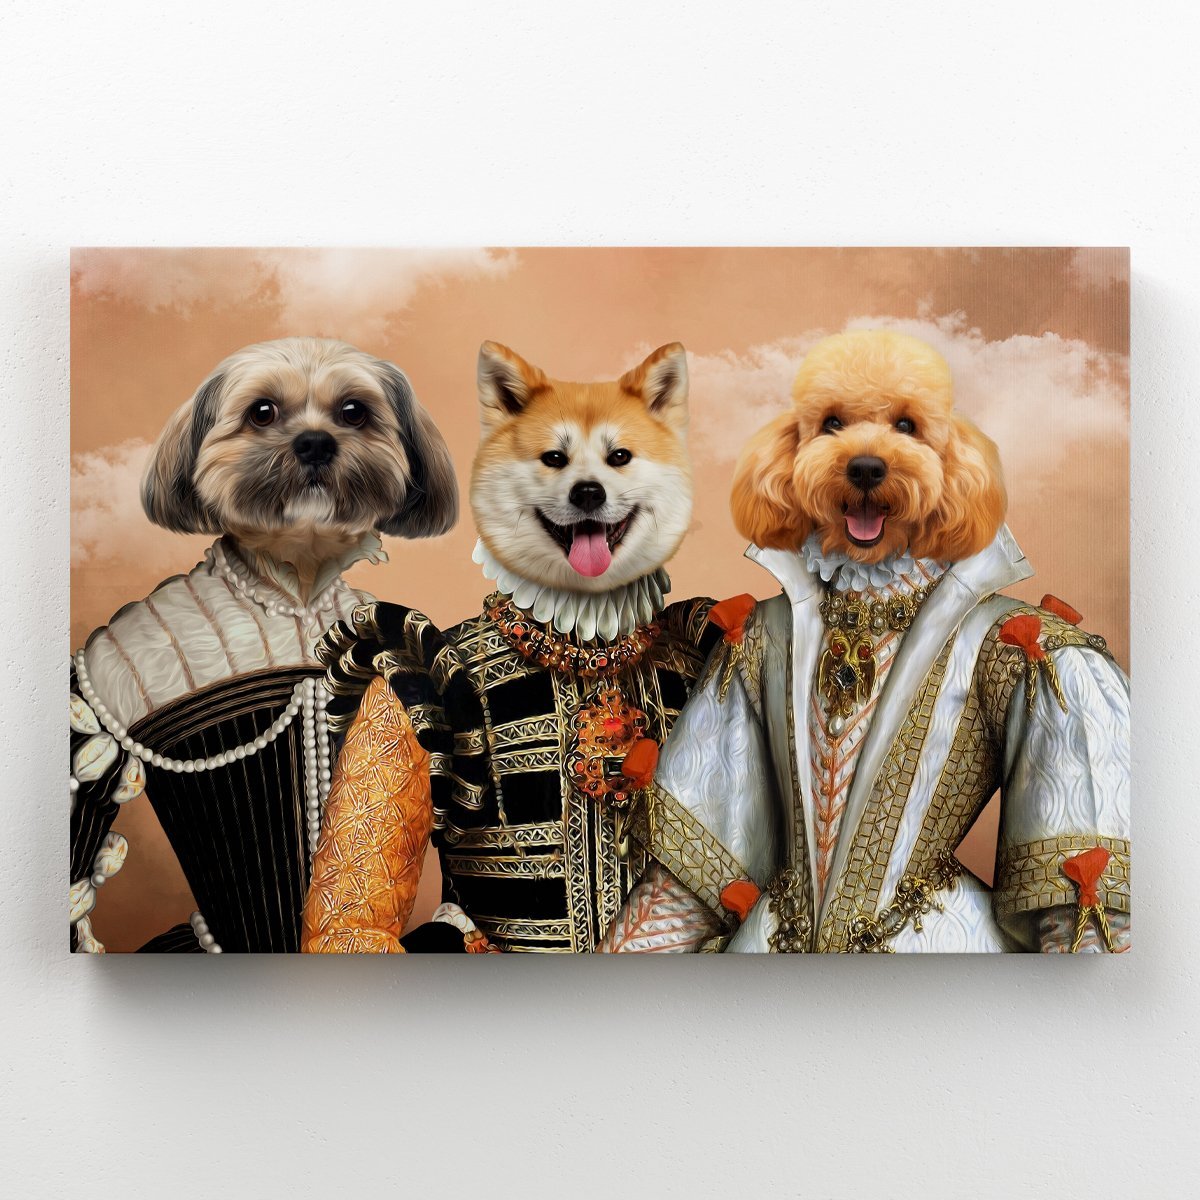 The Dignified 3: Custom Pet Canvas - Paw & Glory - #pet portraits# - #dog portraits# - #pet portraits uk#paw and glory, custom pet portrait canvas,dog photo on canvas, pet picture on canvas, personalised pet canvas, the pet on canvas, pet on canvas uk